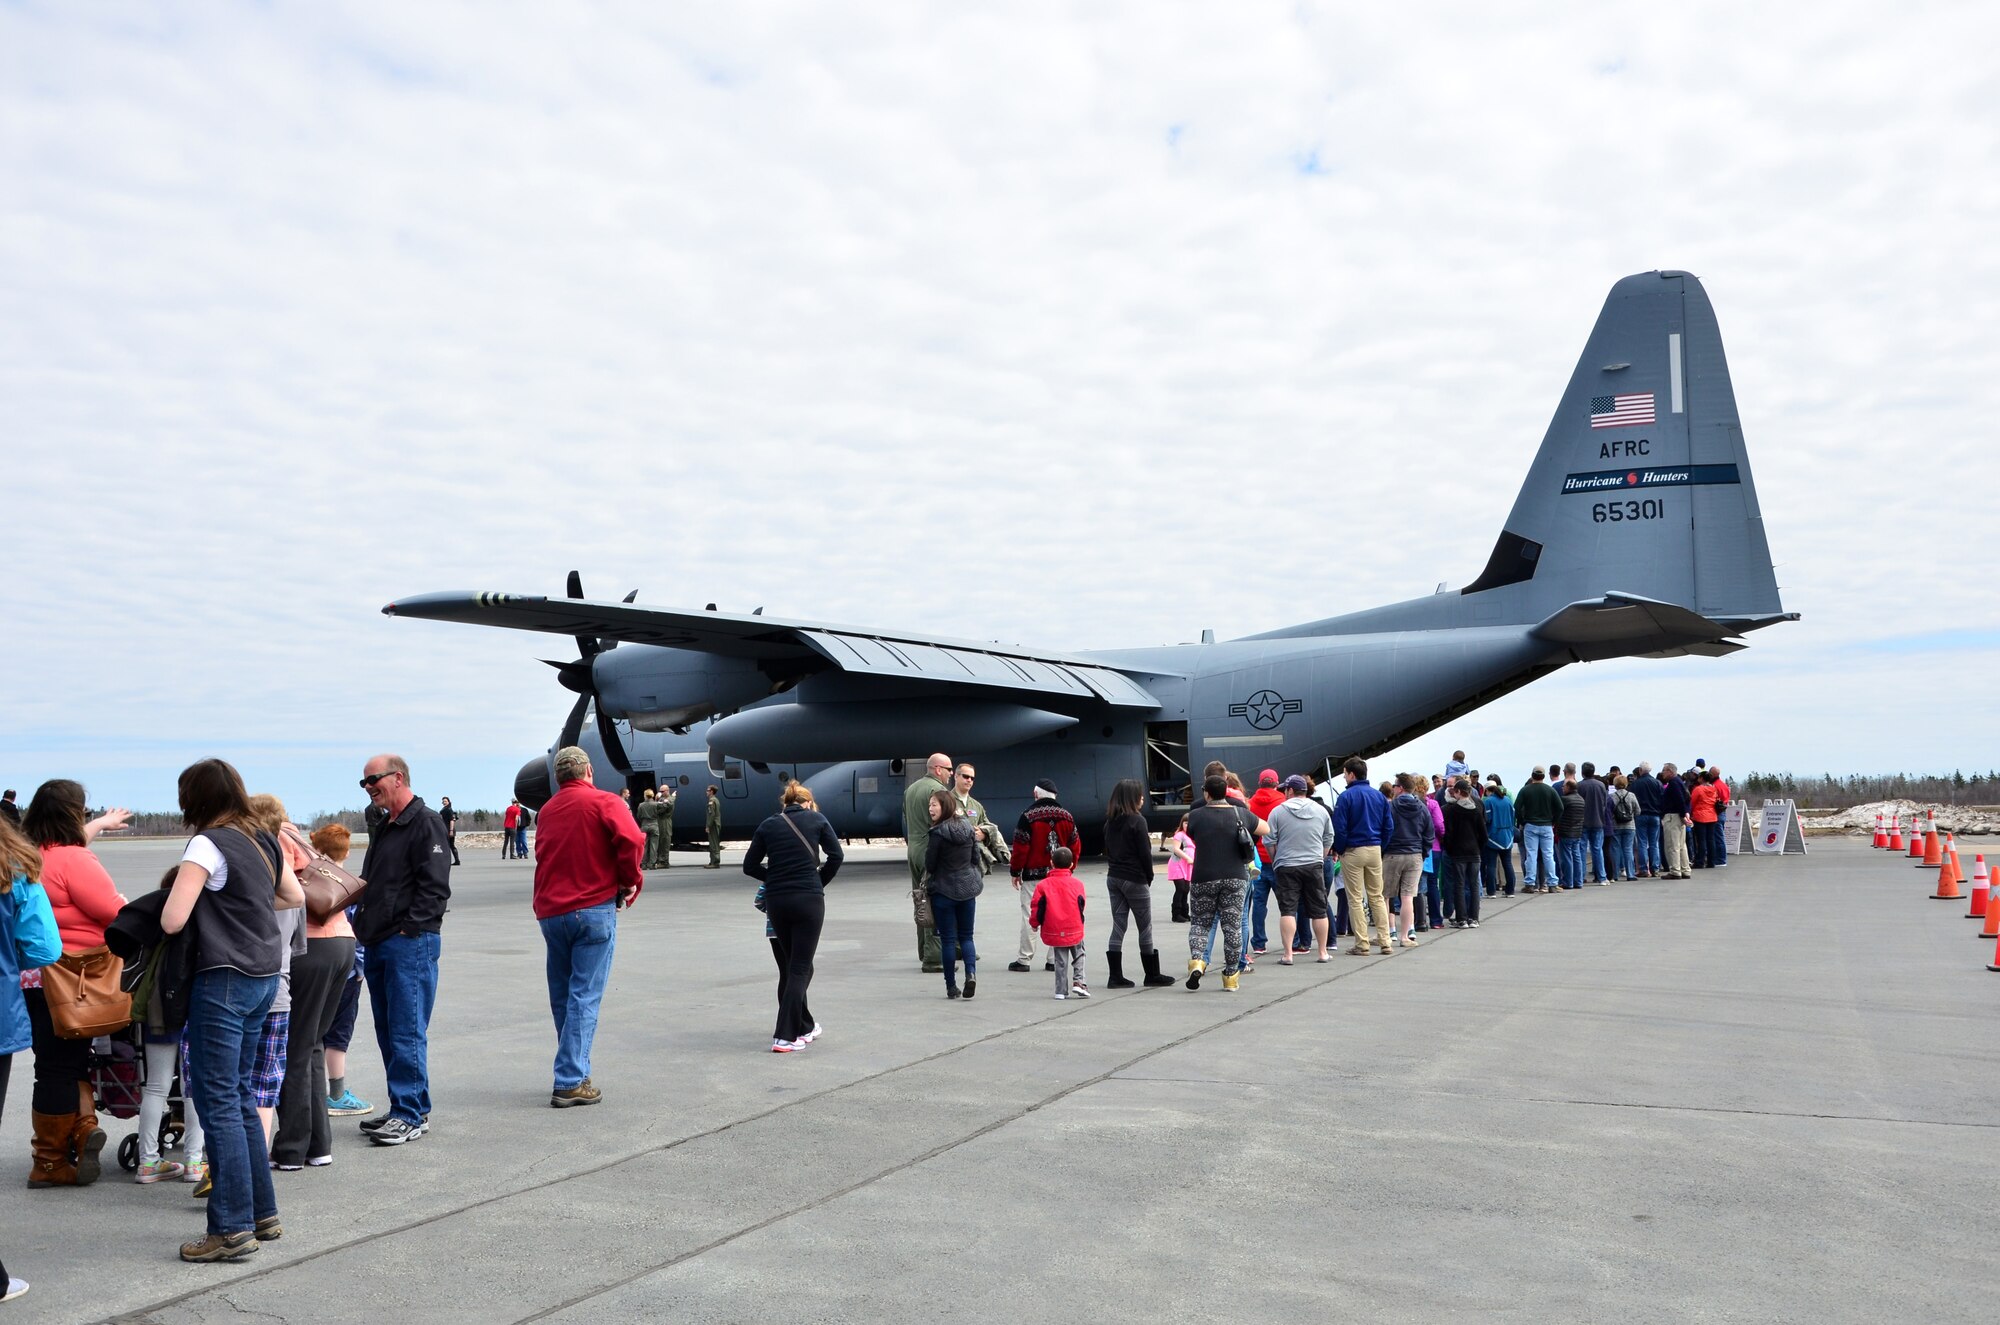 More than 1100 visitors waited in line to meet the 53rd Weather Reconnaissance Squadron Hurricane Hunter crew members during the Halifax portion of the 2015 Hurricane Awareness Tour at the Halifax-Stanfield International Airport in Nova Scotia May 3. (U.S. Air Force photo/Master Sgt. Brian Lamar)